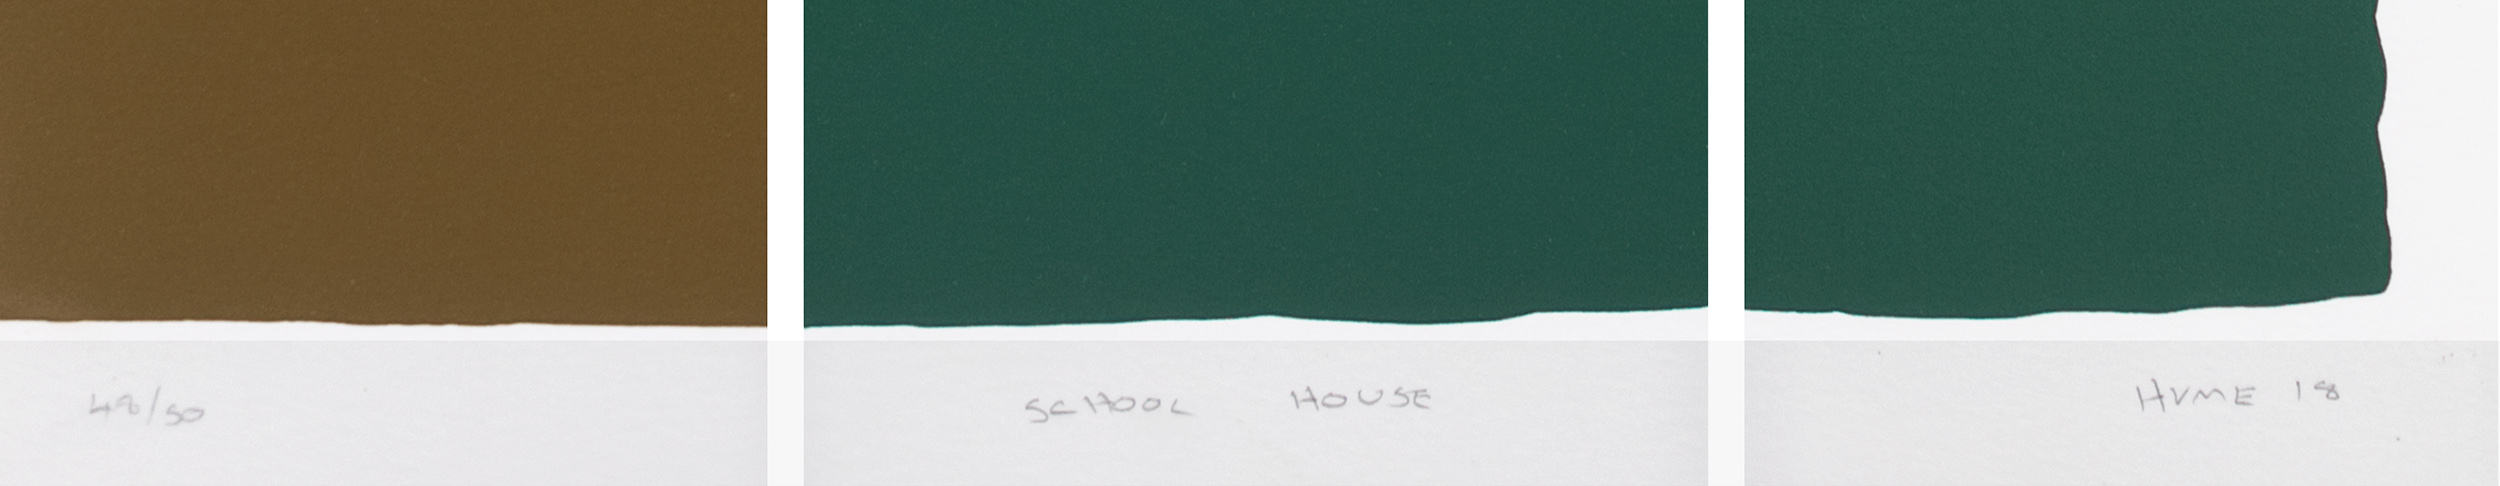 Gary Hume 'School House' pencil detail